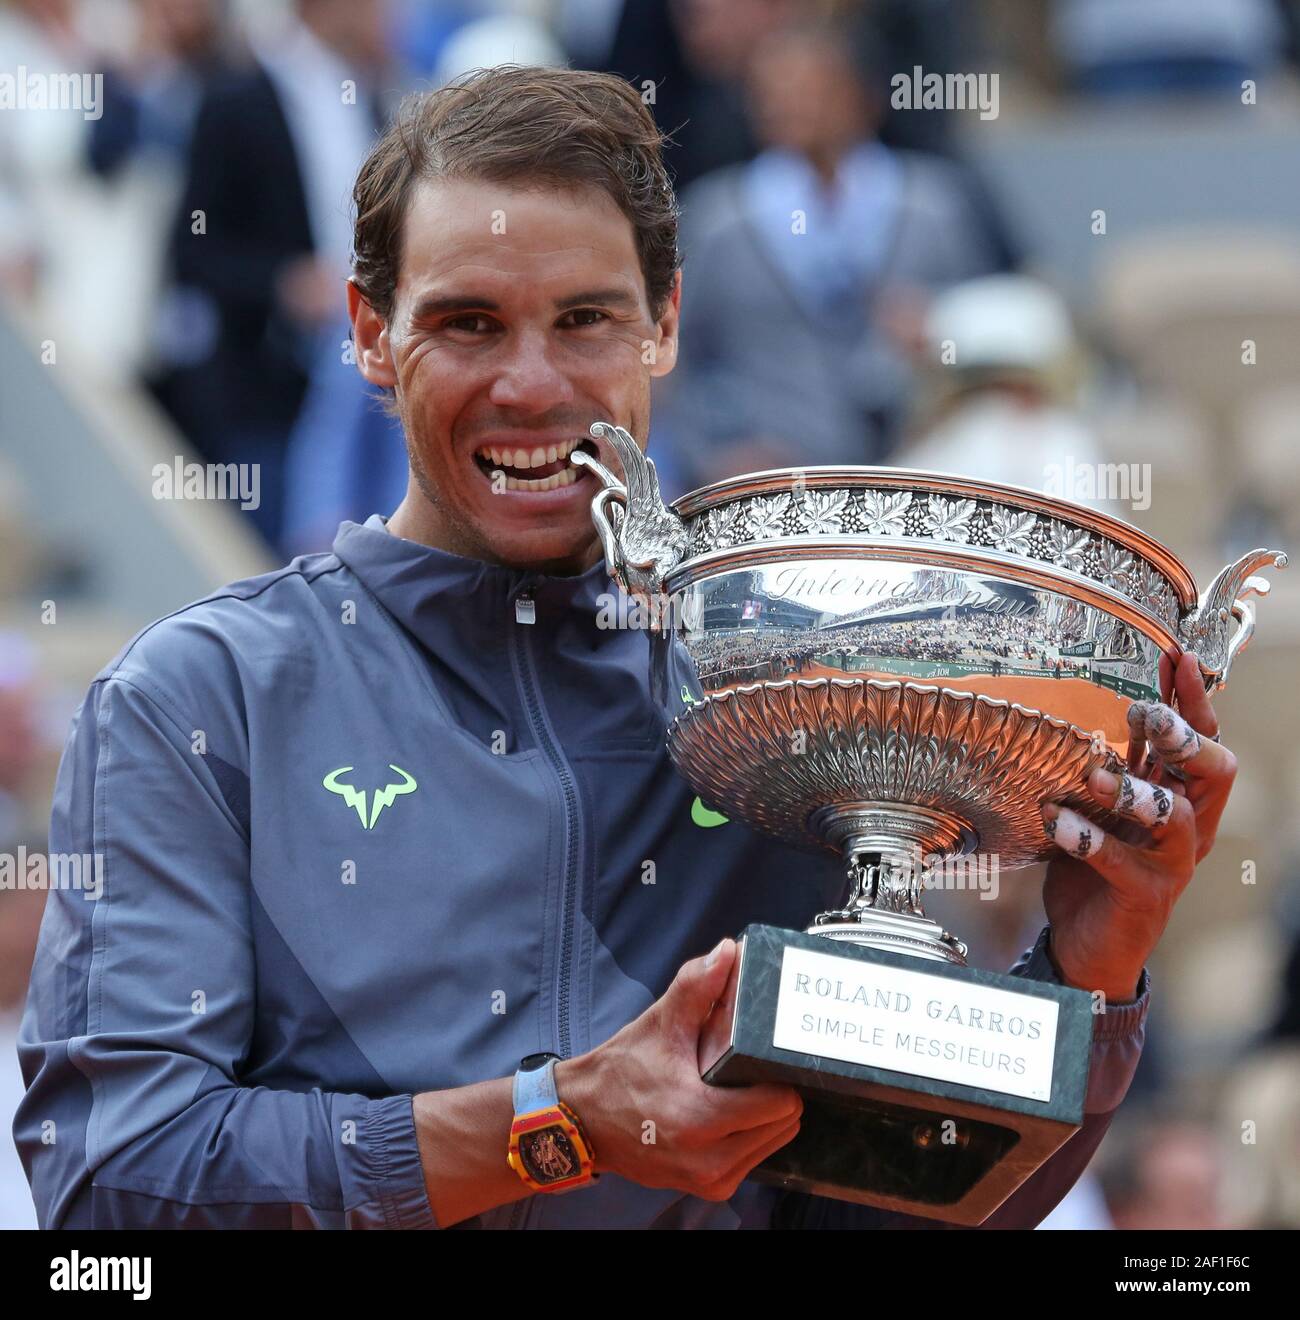 Paris, France. 12th Dec, 2019. Rafael Nadal of Spain bites the championship  trophy after winning his French Open men's final match against Dominic Thiem  of Austria at Roland Garros in Paris on